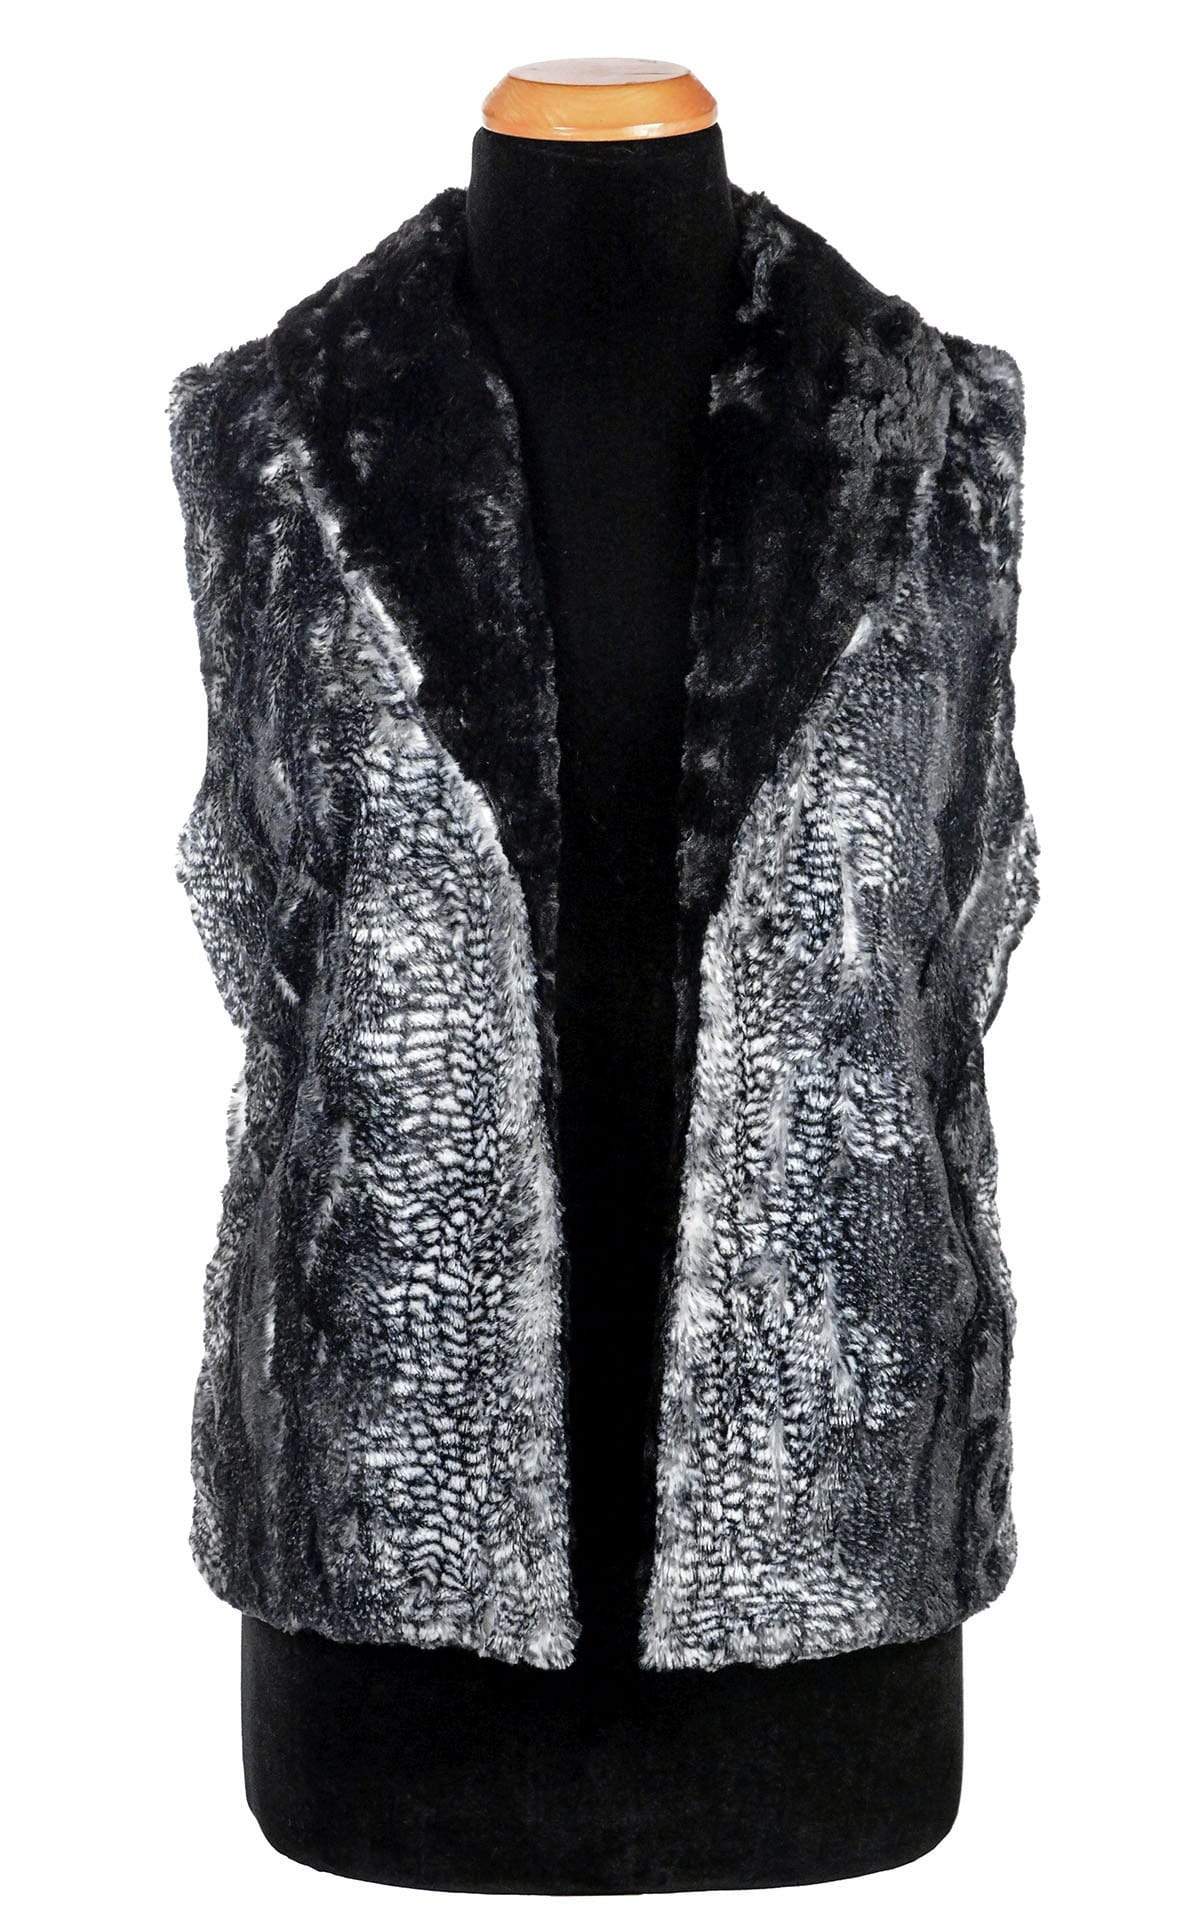 Black Mamba Black and White Faux Fur with Cuddly Faux Fur Black | Open View of Shawl Collar Vest | By Pandemonium Millinery | Seattle WA USA